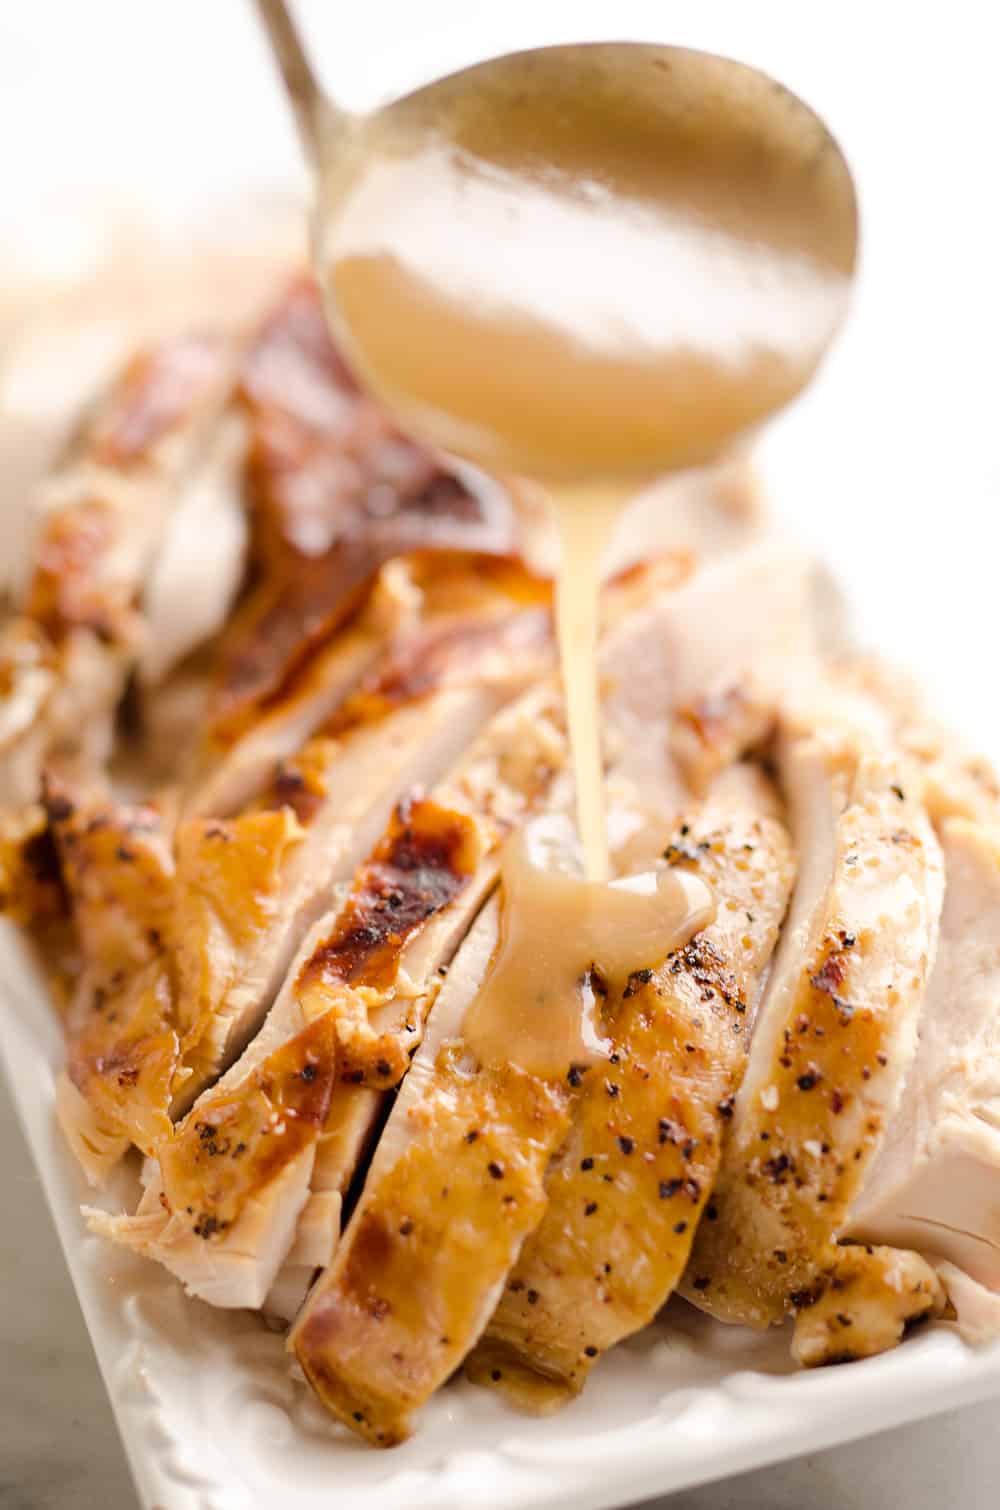 For the holidays, take all of the guess work out of the main dish with the Easiest Roasted Turkey & Gravy recipe. This pre-packaged, seasoned and Oven Ready Jennie-O Turkey goes straight from the freezer to the oven and results in moist and flavorful meat you will be proud to serve!